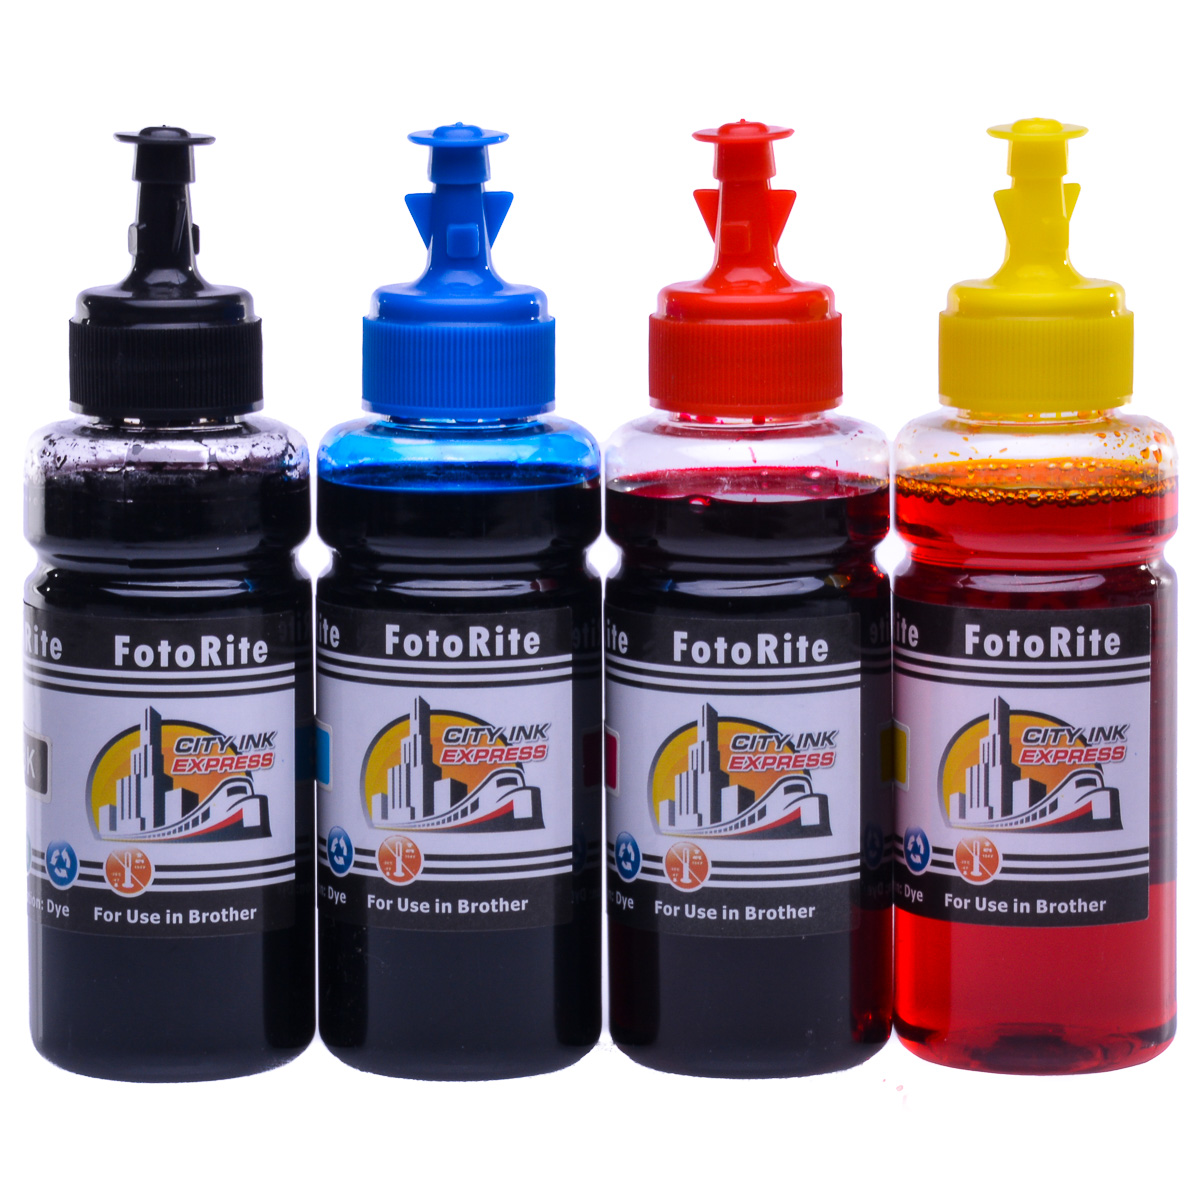 Cheap Multipack dye ink refill replaces Brother Fax 1355